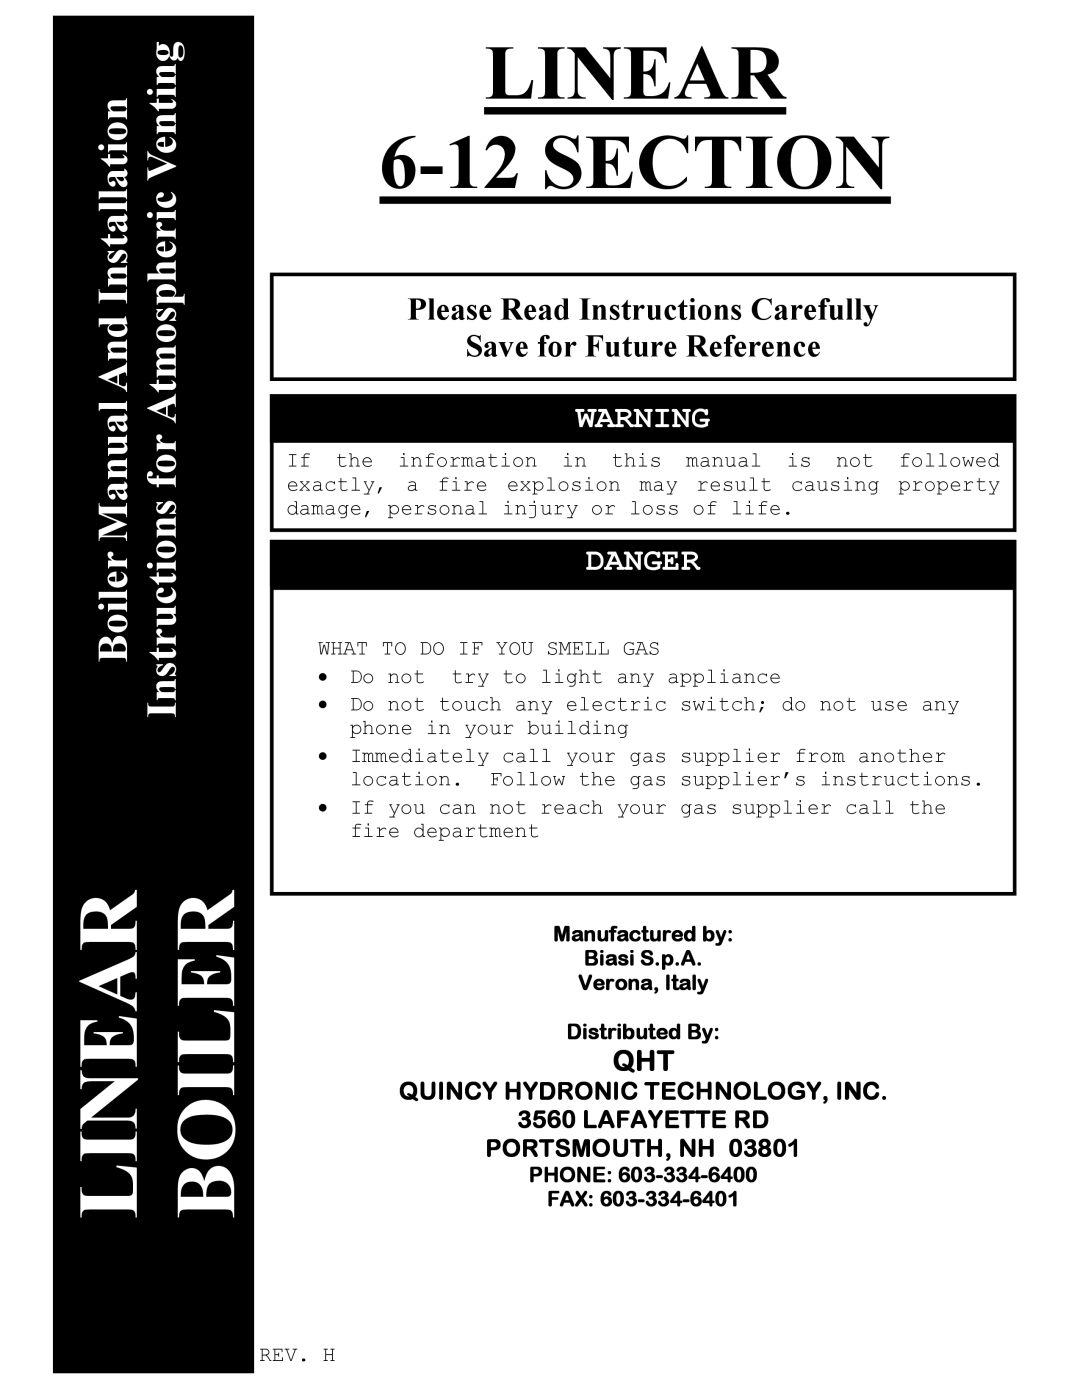 Linear Boiler installation instructions Please Read Instructions Carefully Save for Future Reference, Linear, Danger 